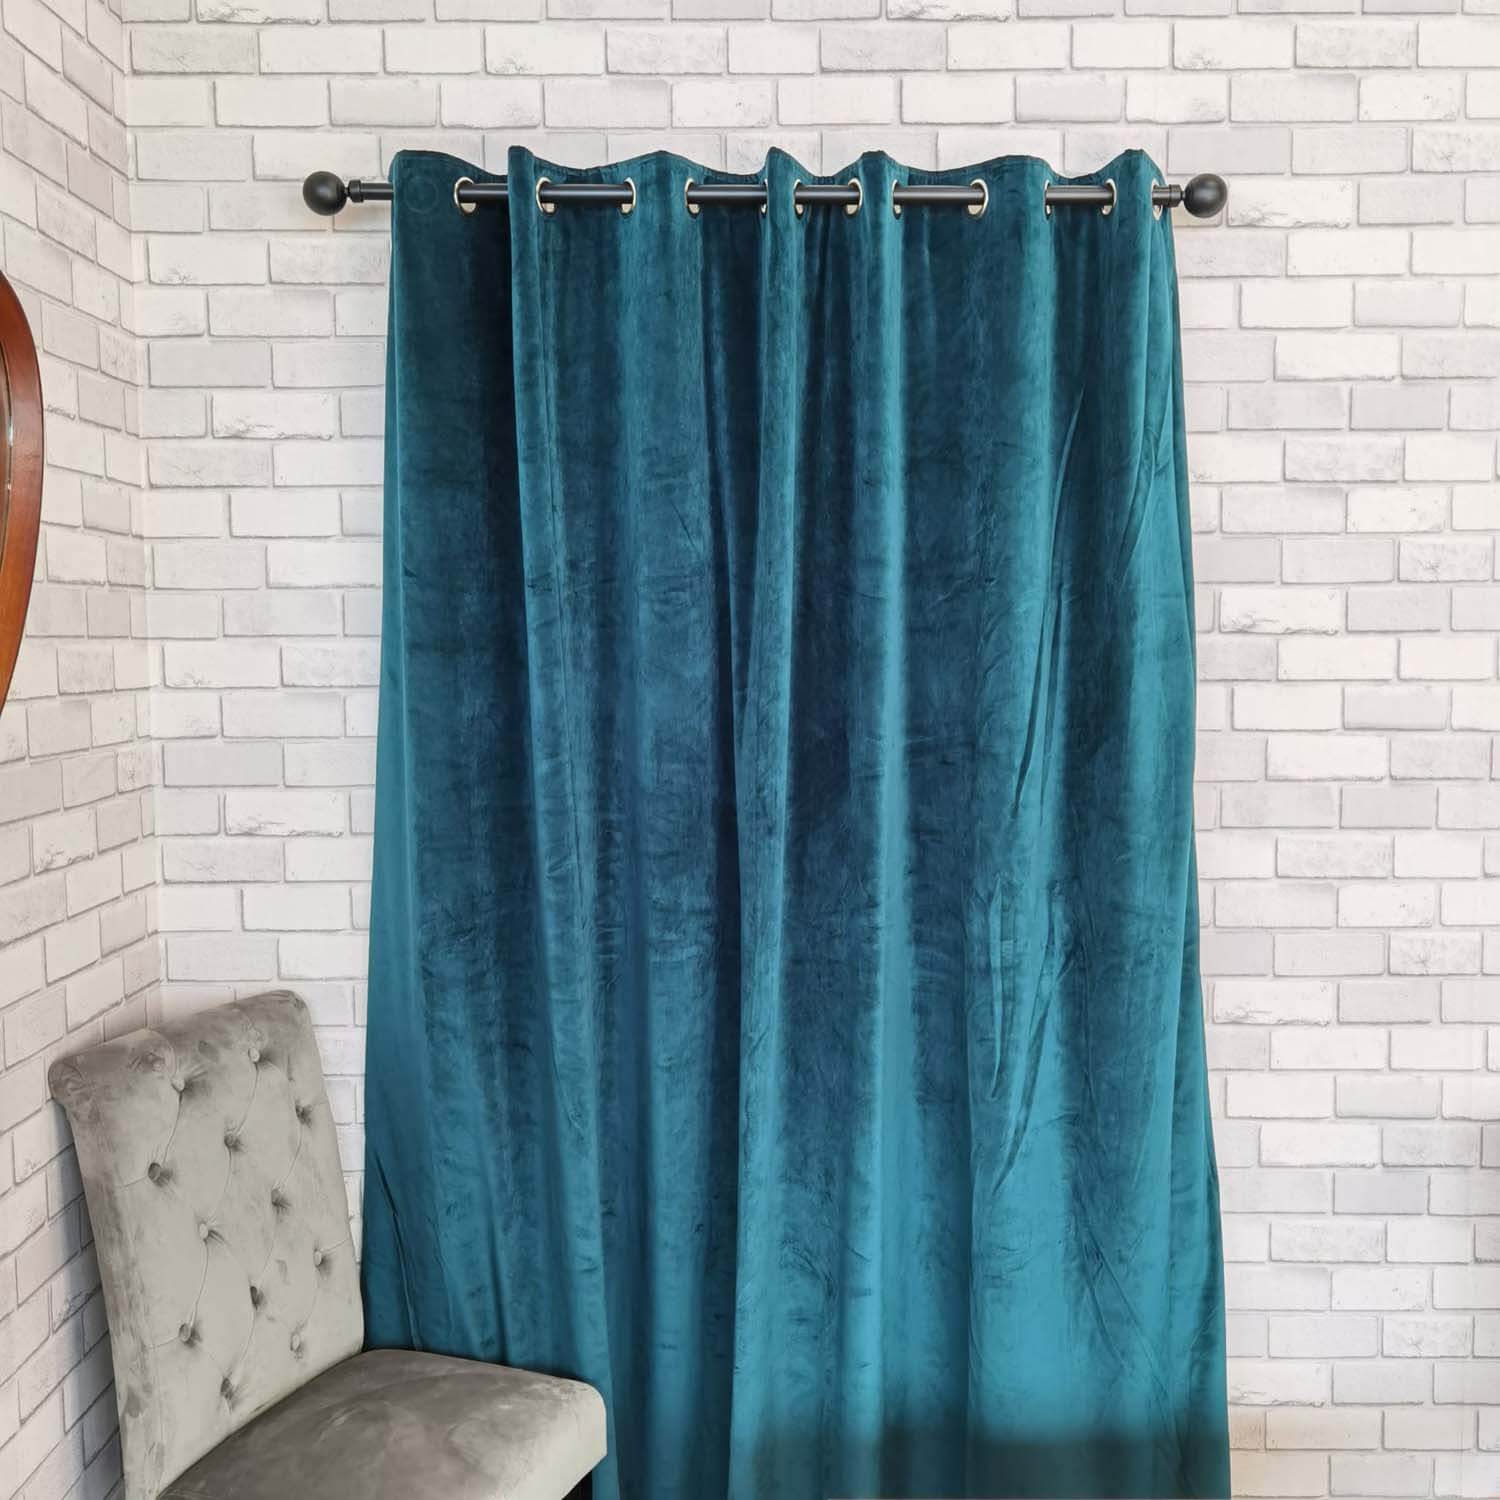 The Home Collection Elegance Readymade Interlined Curtains - Marine 1 Shaws Department Stores